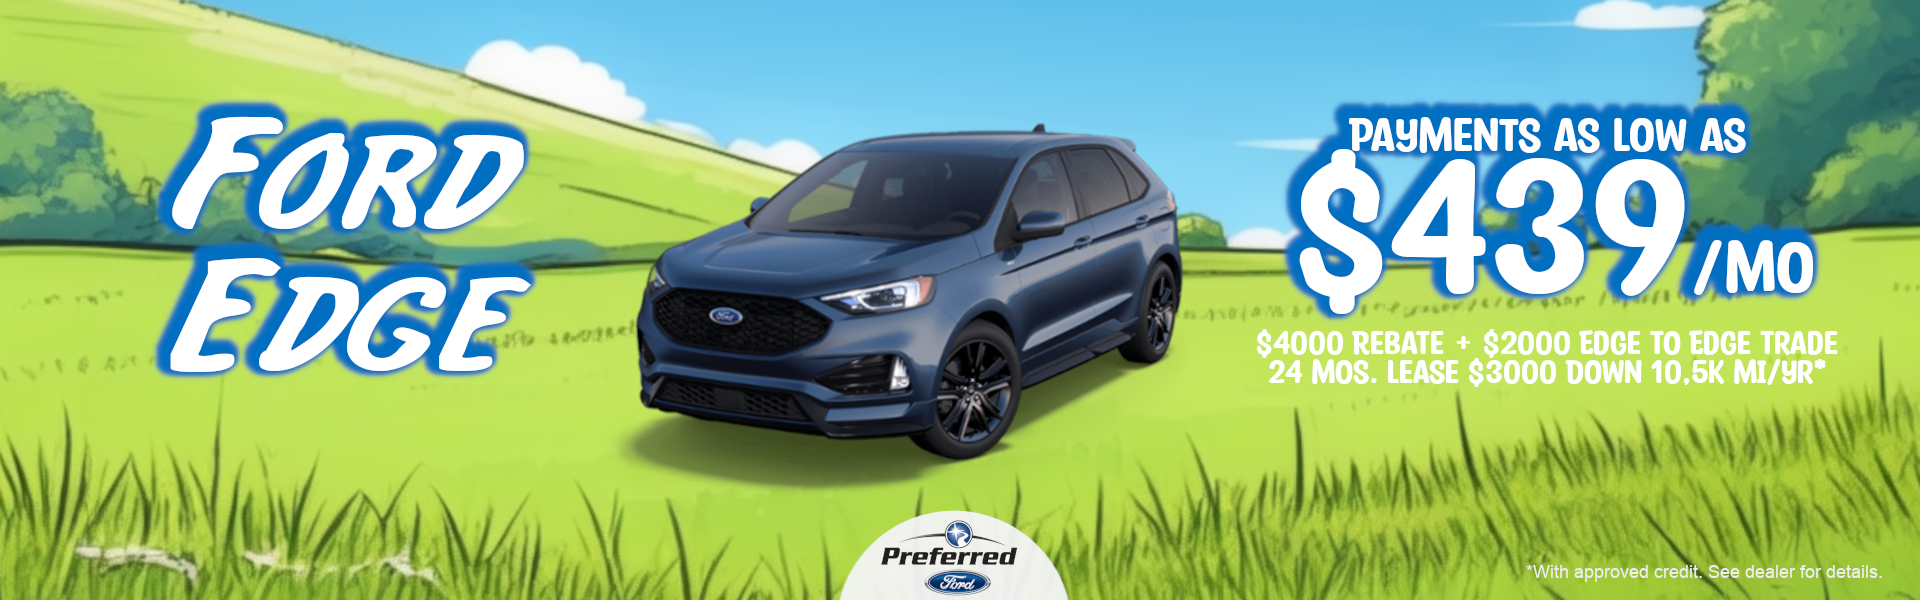 Ford Edge for Payments As Low As $439 Per Month